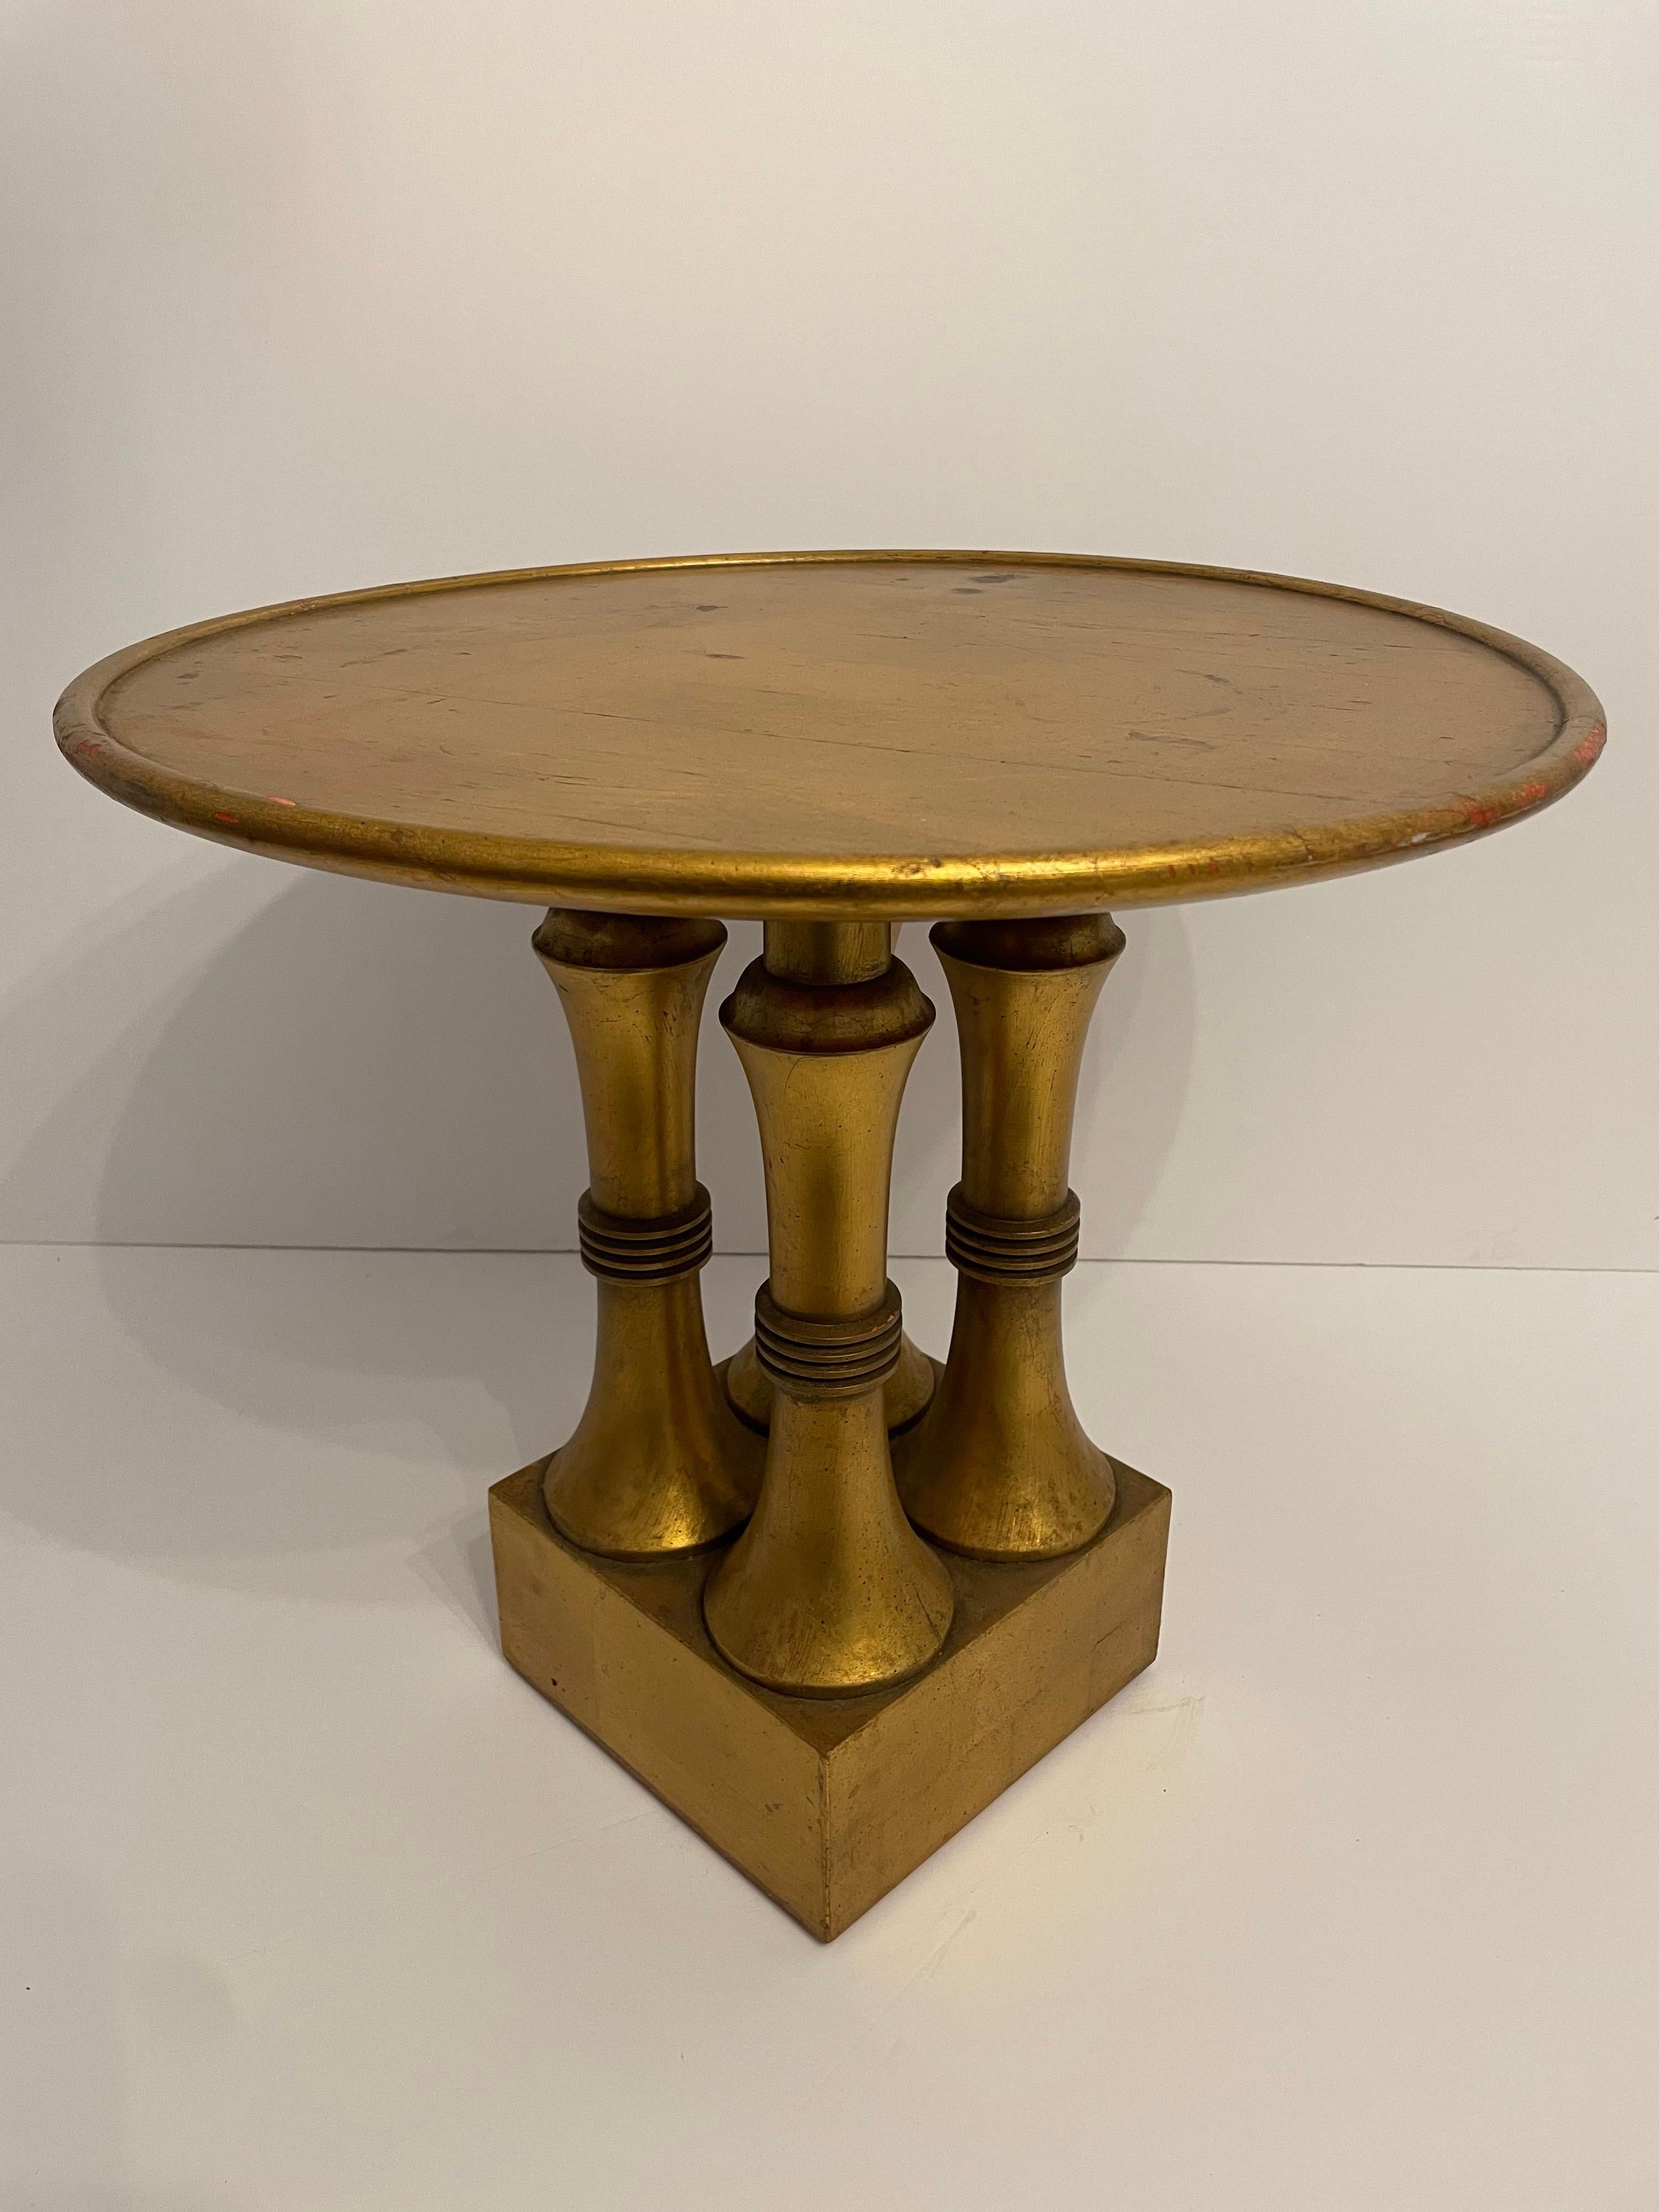 Vintage Hollywood Regency table. Can be used as a great little cocktail or side table. Super chic, one of a kind custom table. Original finish. Has wear on top to gilt finish from age and use. Slight warp to top. Labeled 